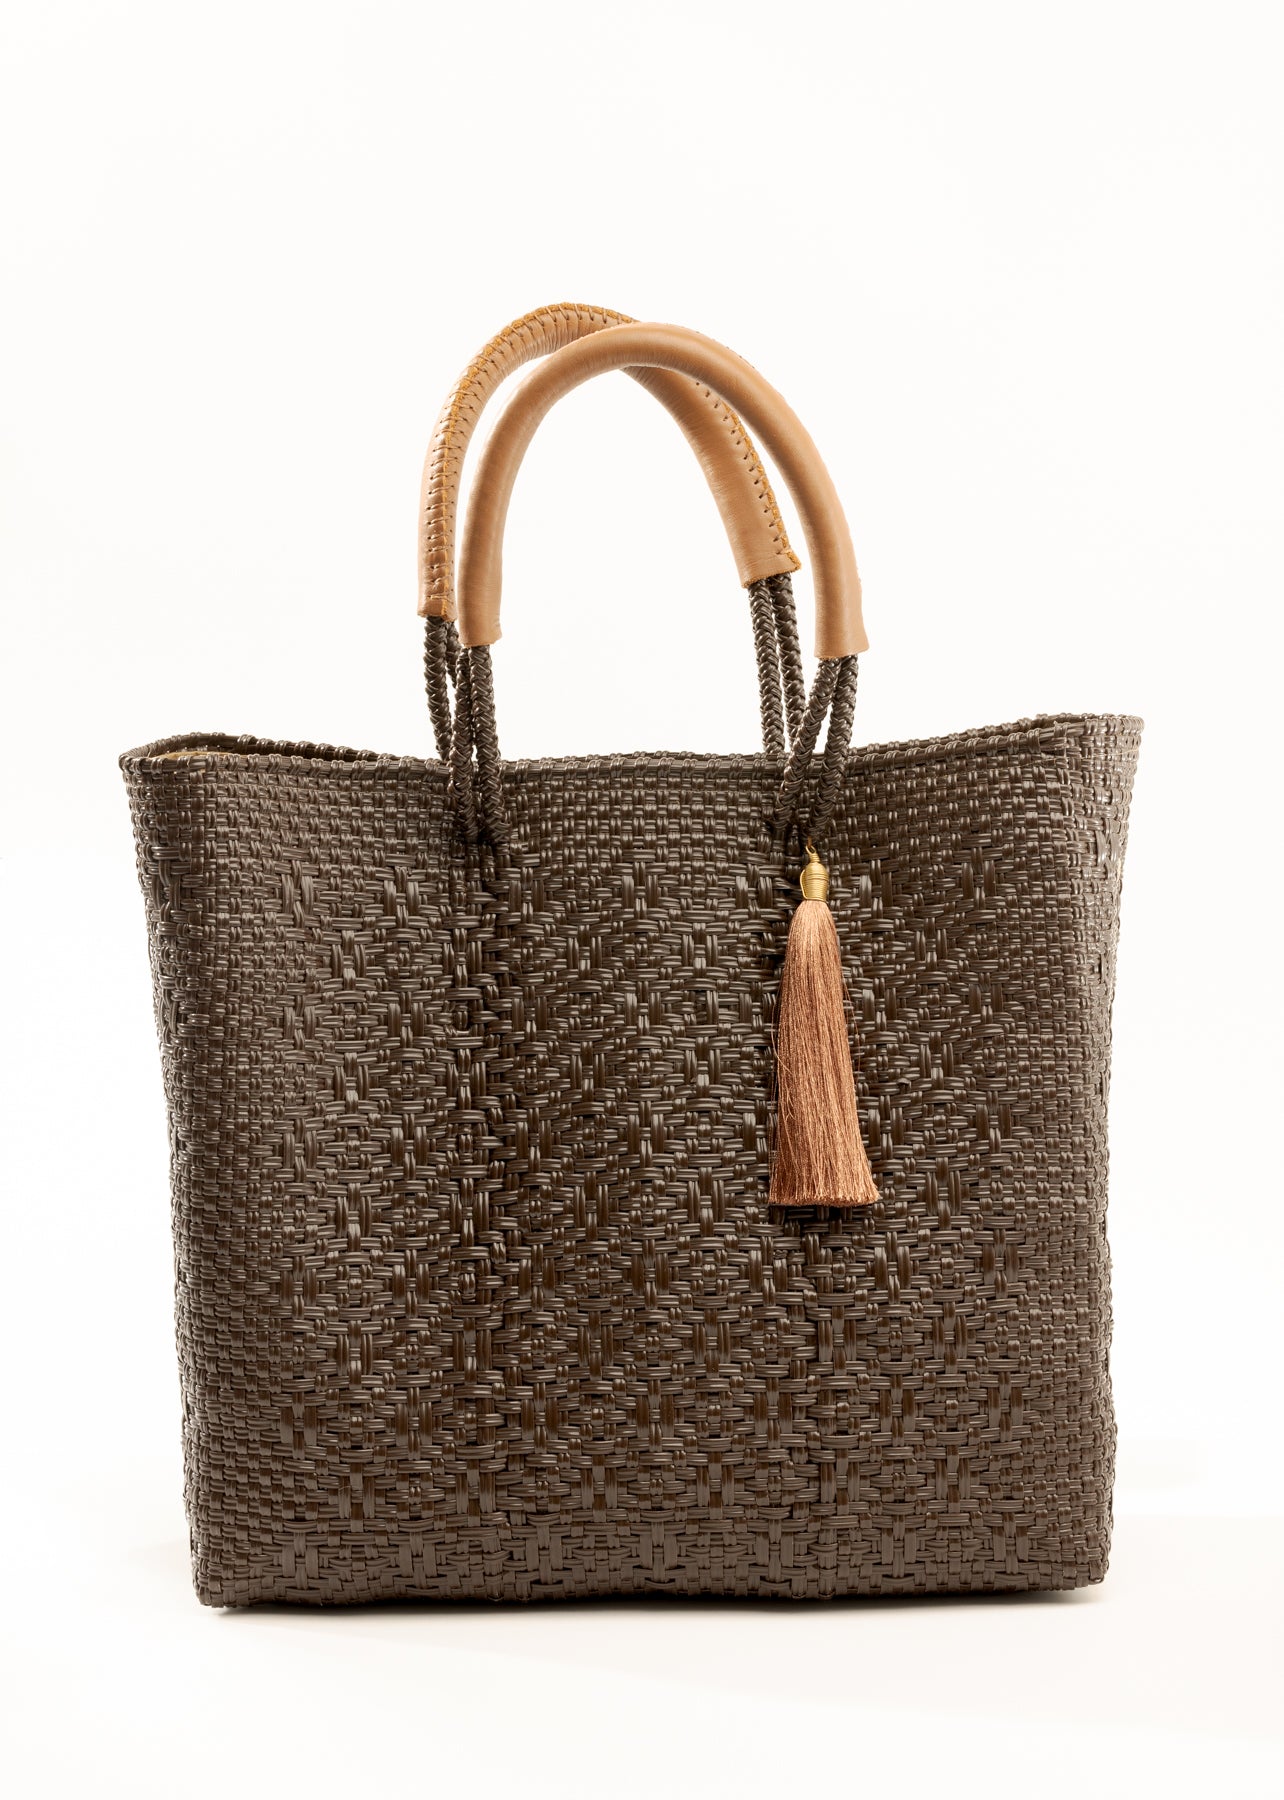 Brown and tan woven handbag made from recycled plastics featuring tan leather handles and tassel detail